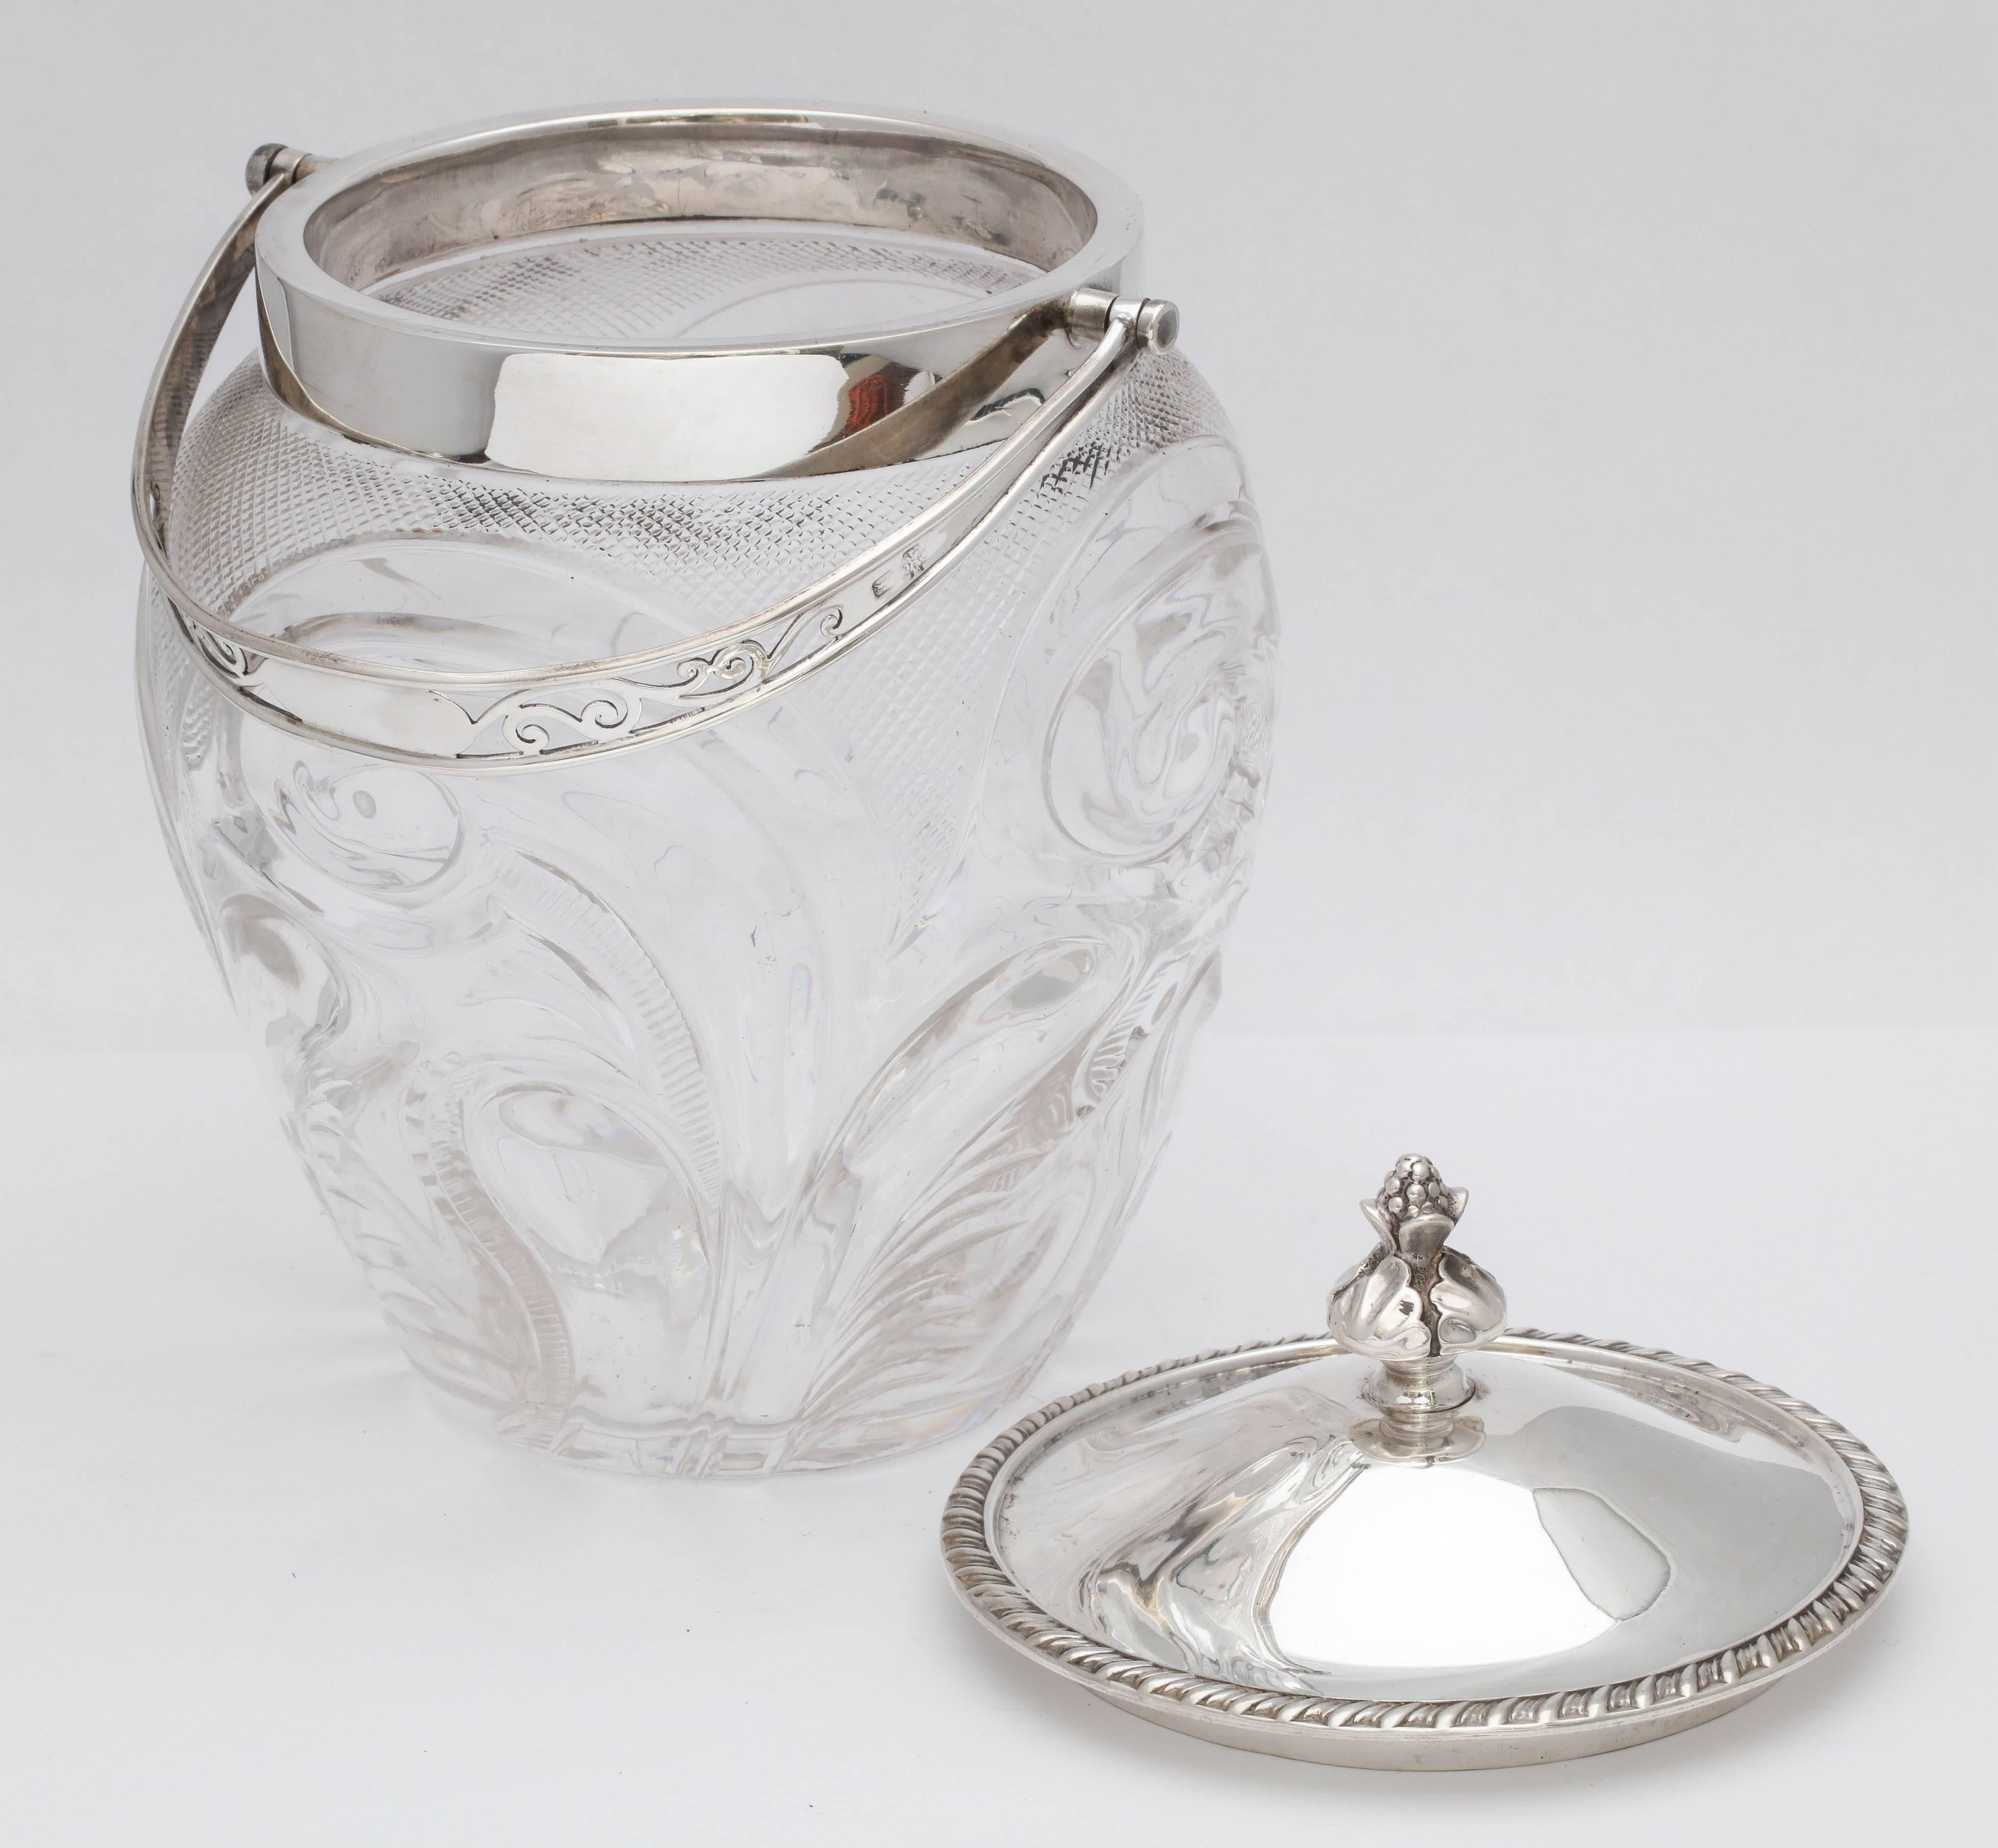 Edwardian Sterling Silver-Mounted Cut Glass Biscuit Barrel or Ice Bucket 1